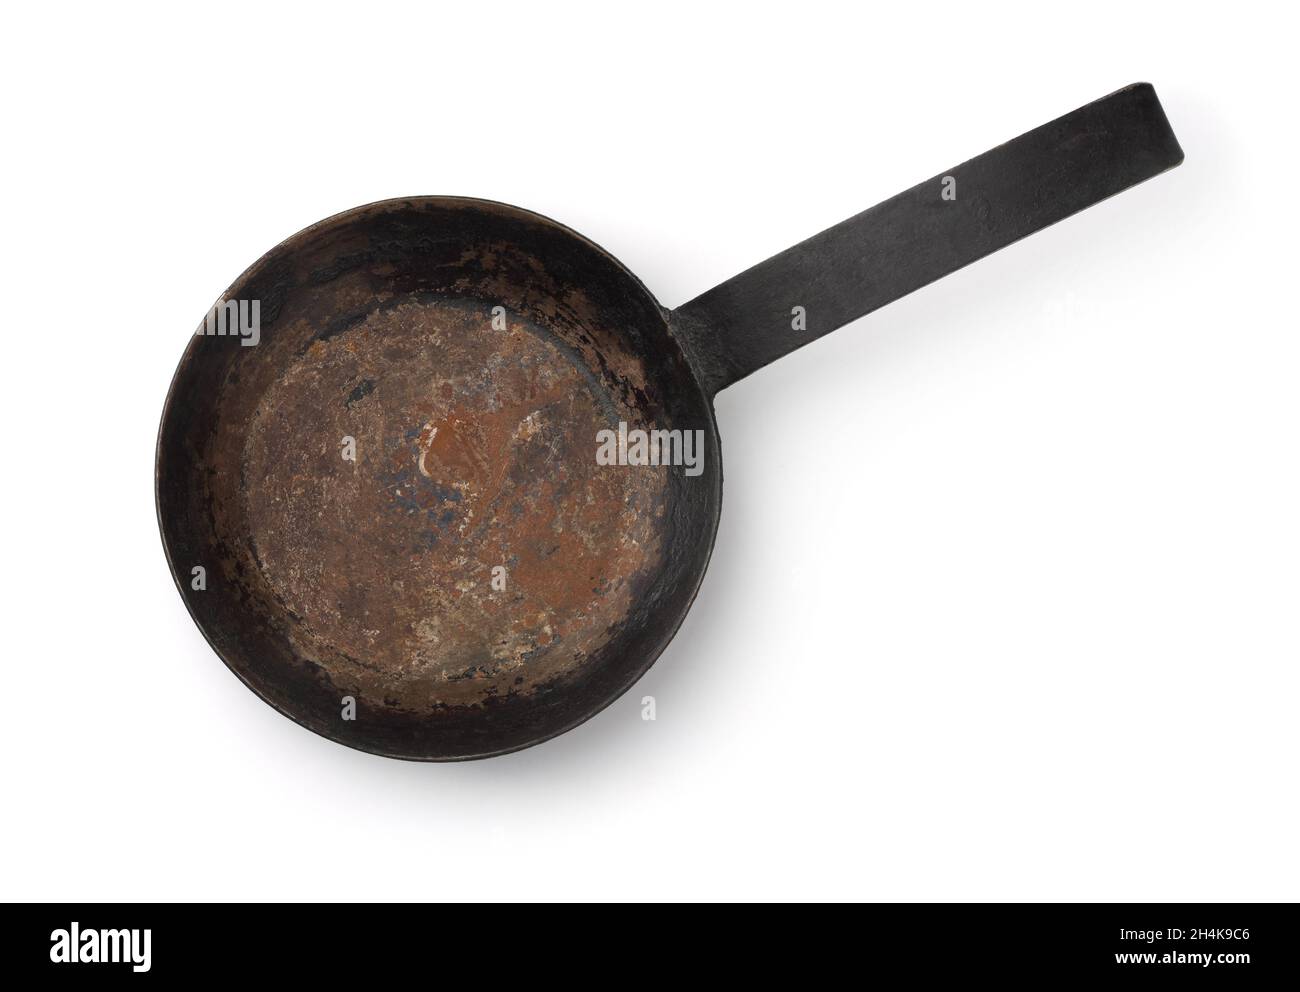 Top view of old empty cast iron frying pan isolated on white Stock Photo